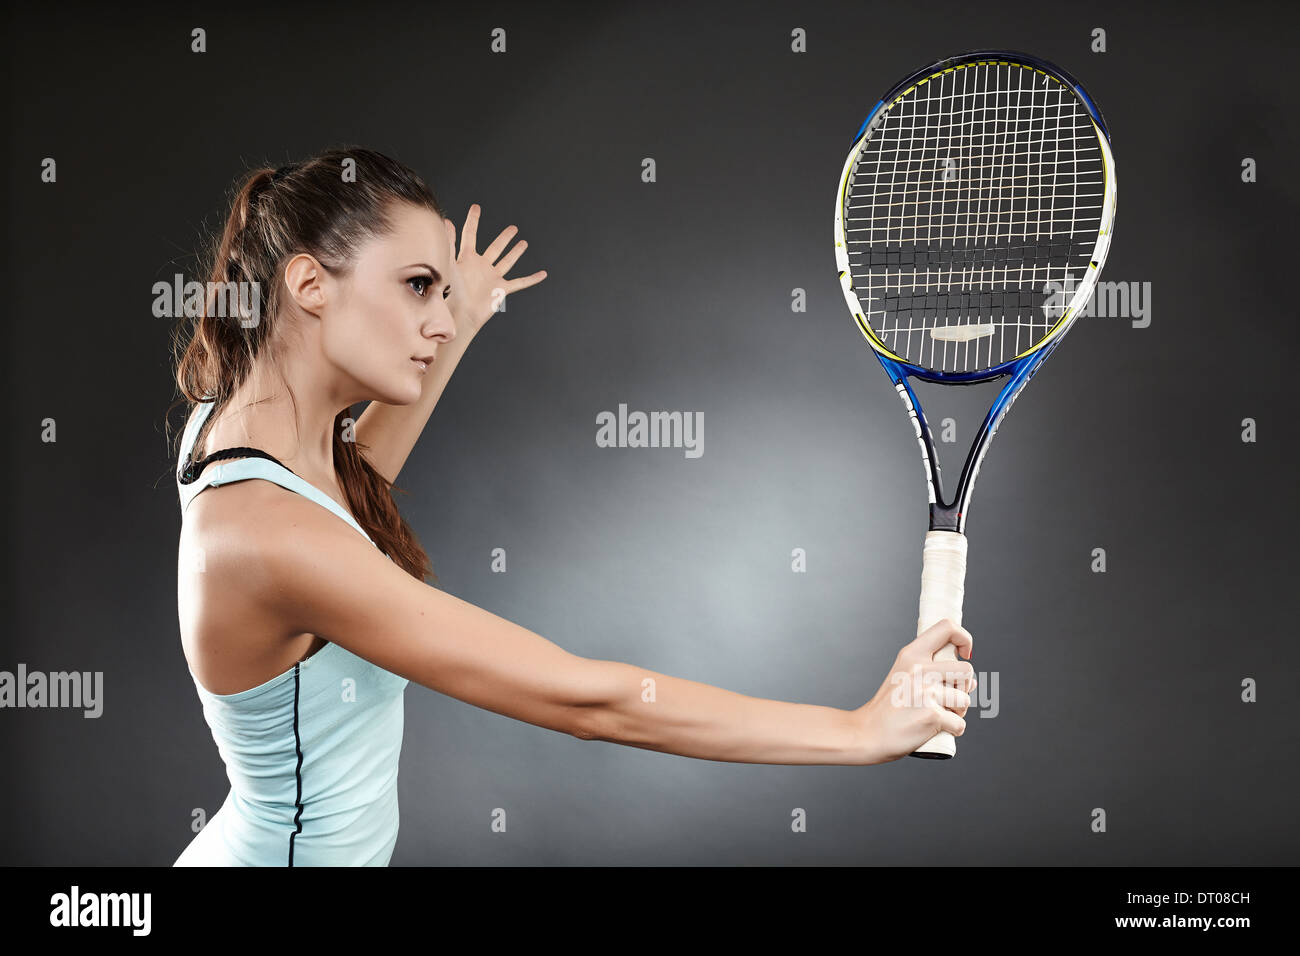 Studio shot of a female tennis player preparing to execute a backhand volley Stock Photo